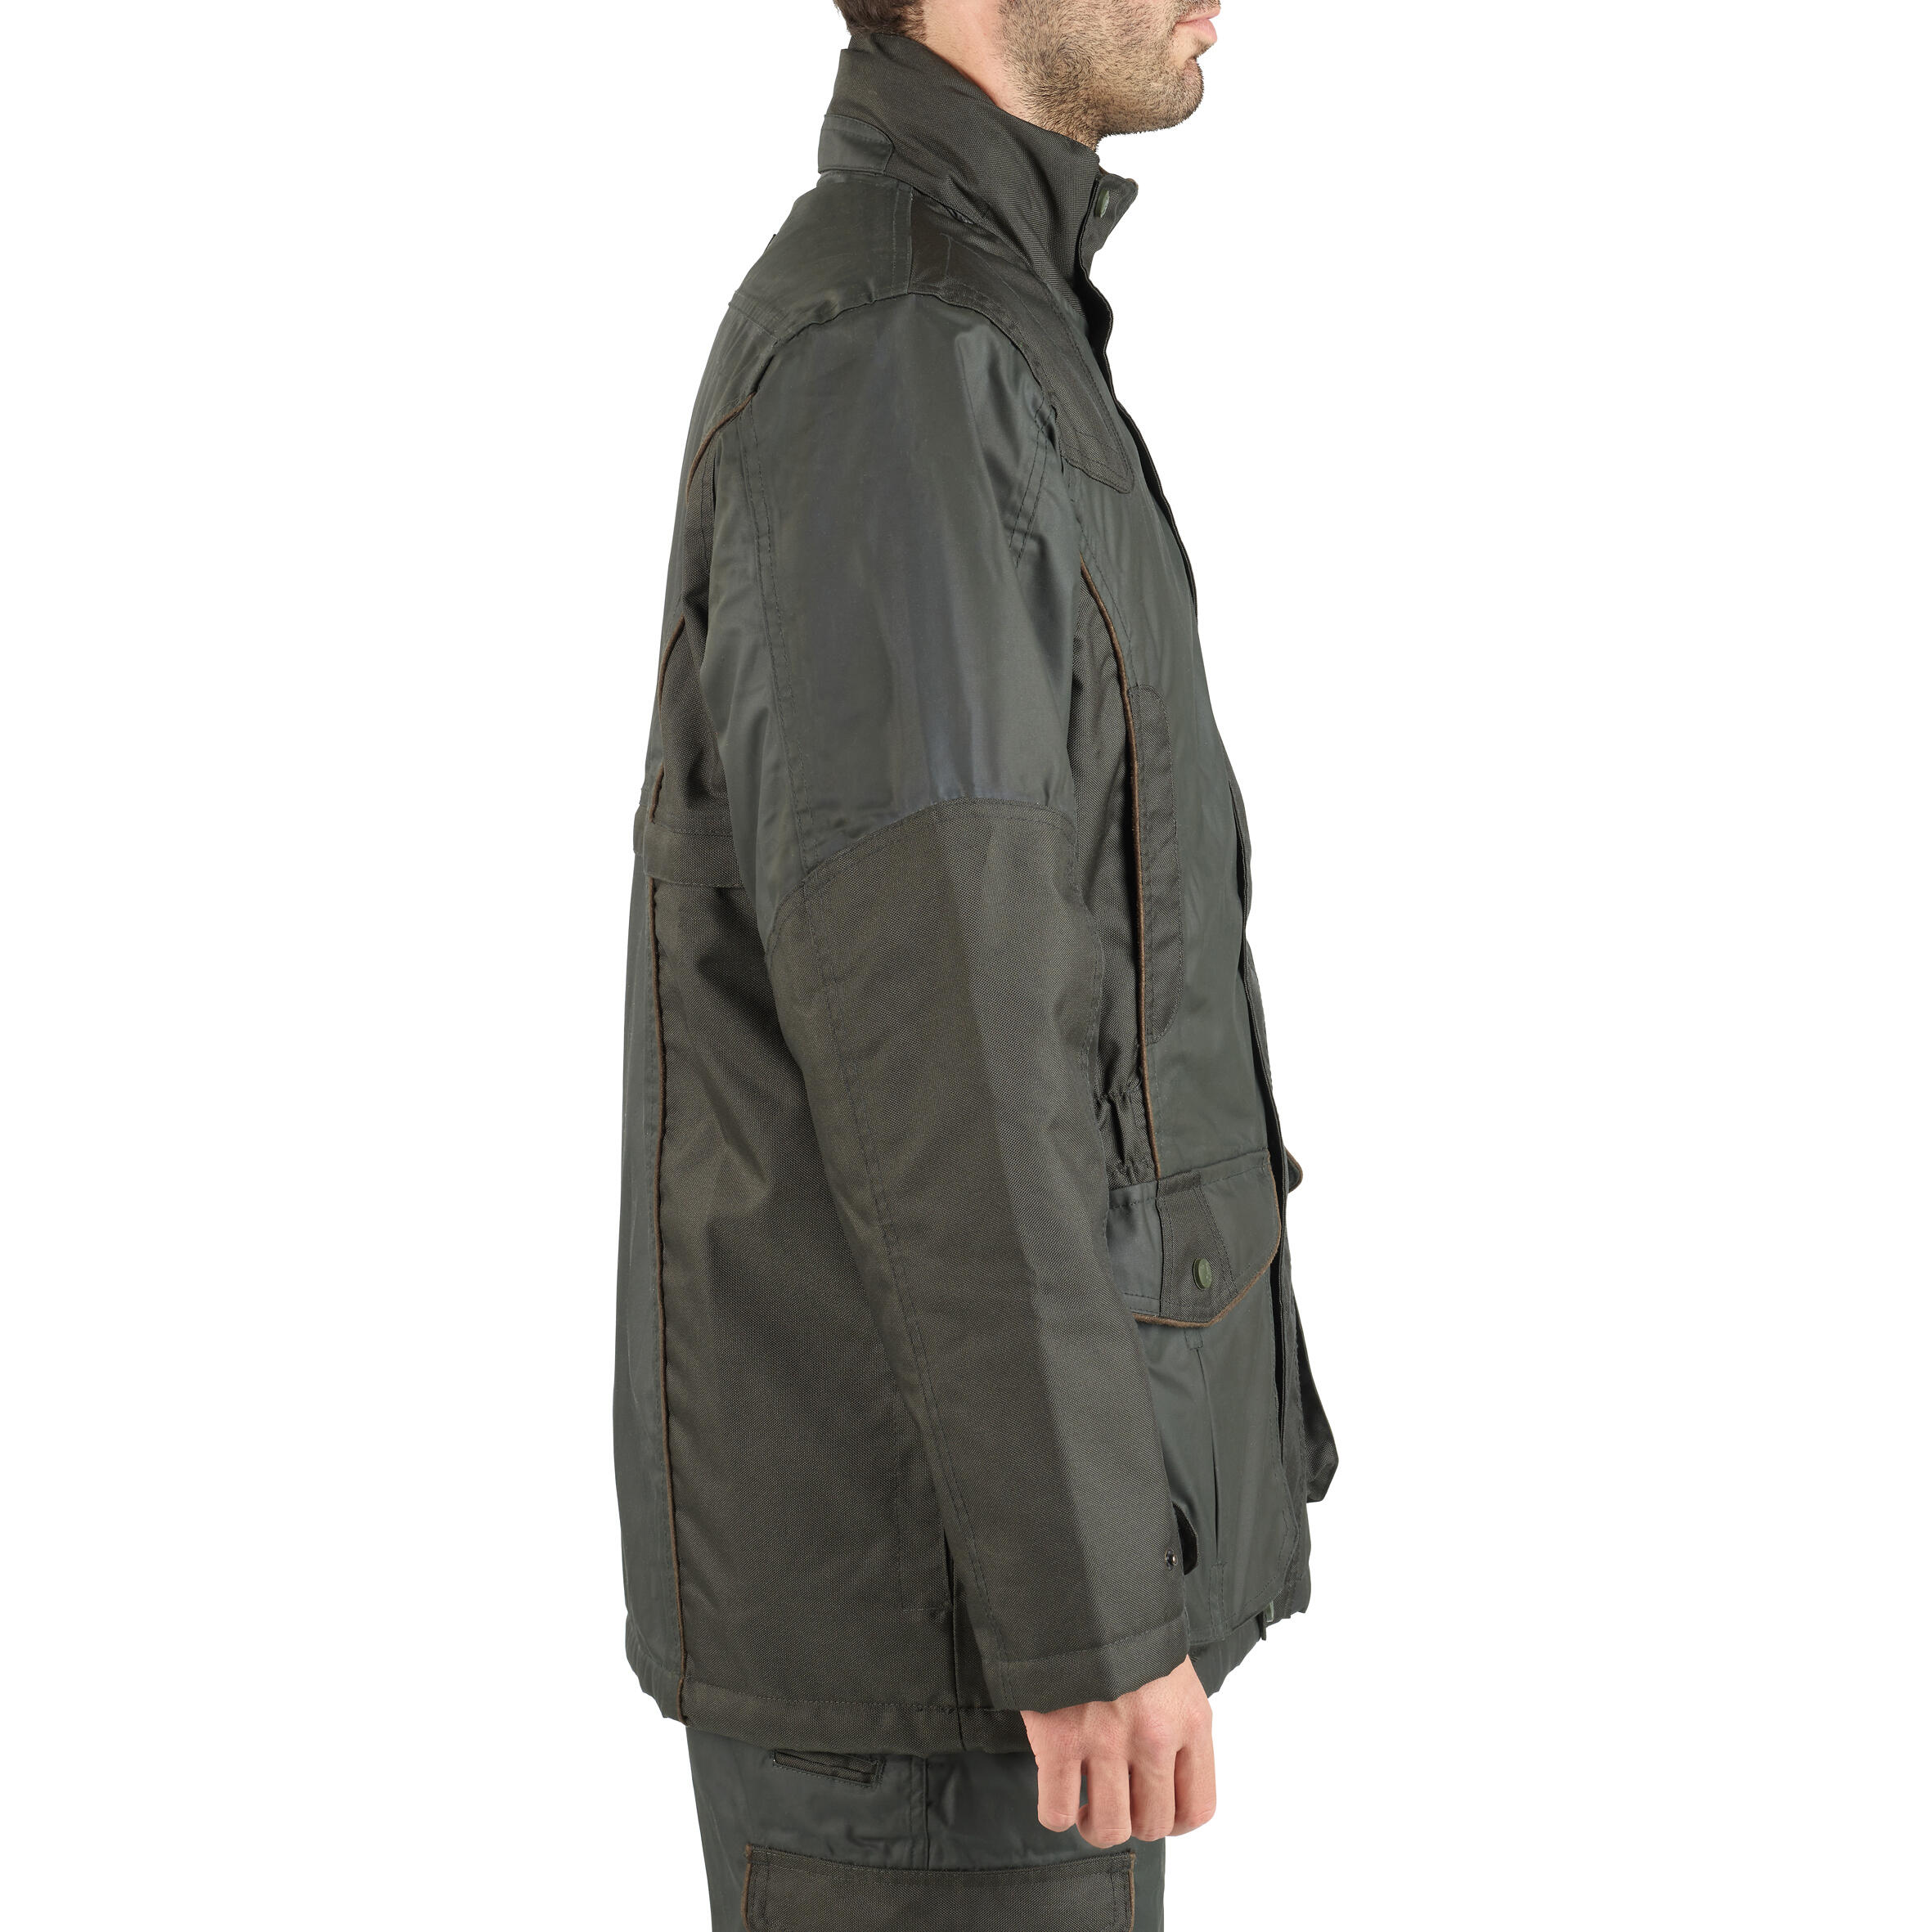 Men's Impertane Jacket by percussion Wax Feel Country Hunting Shooting game 